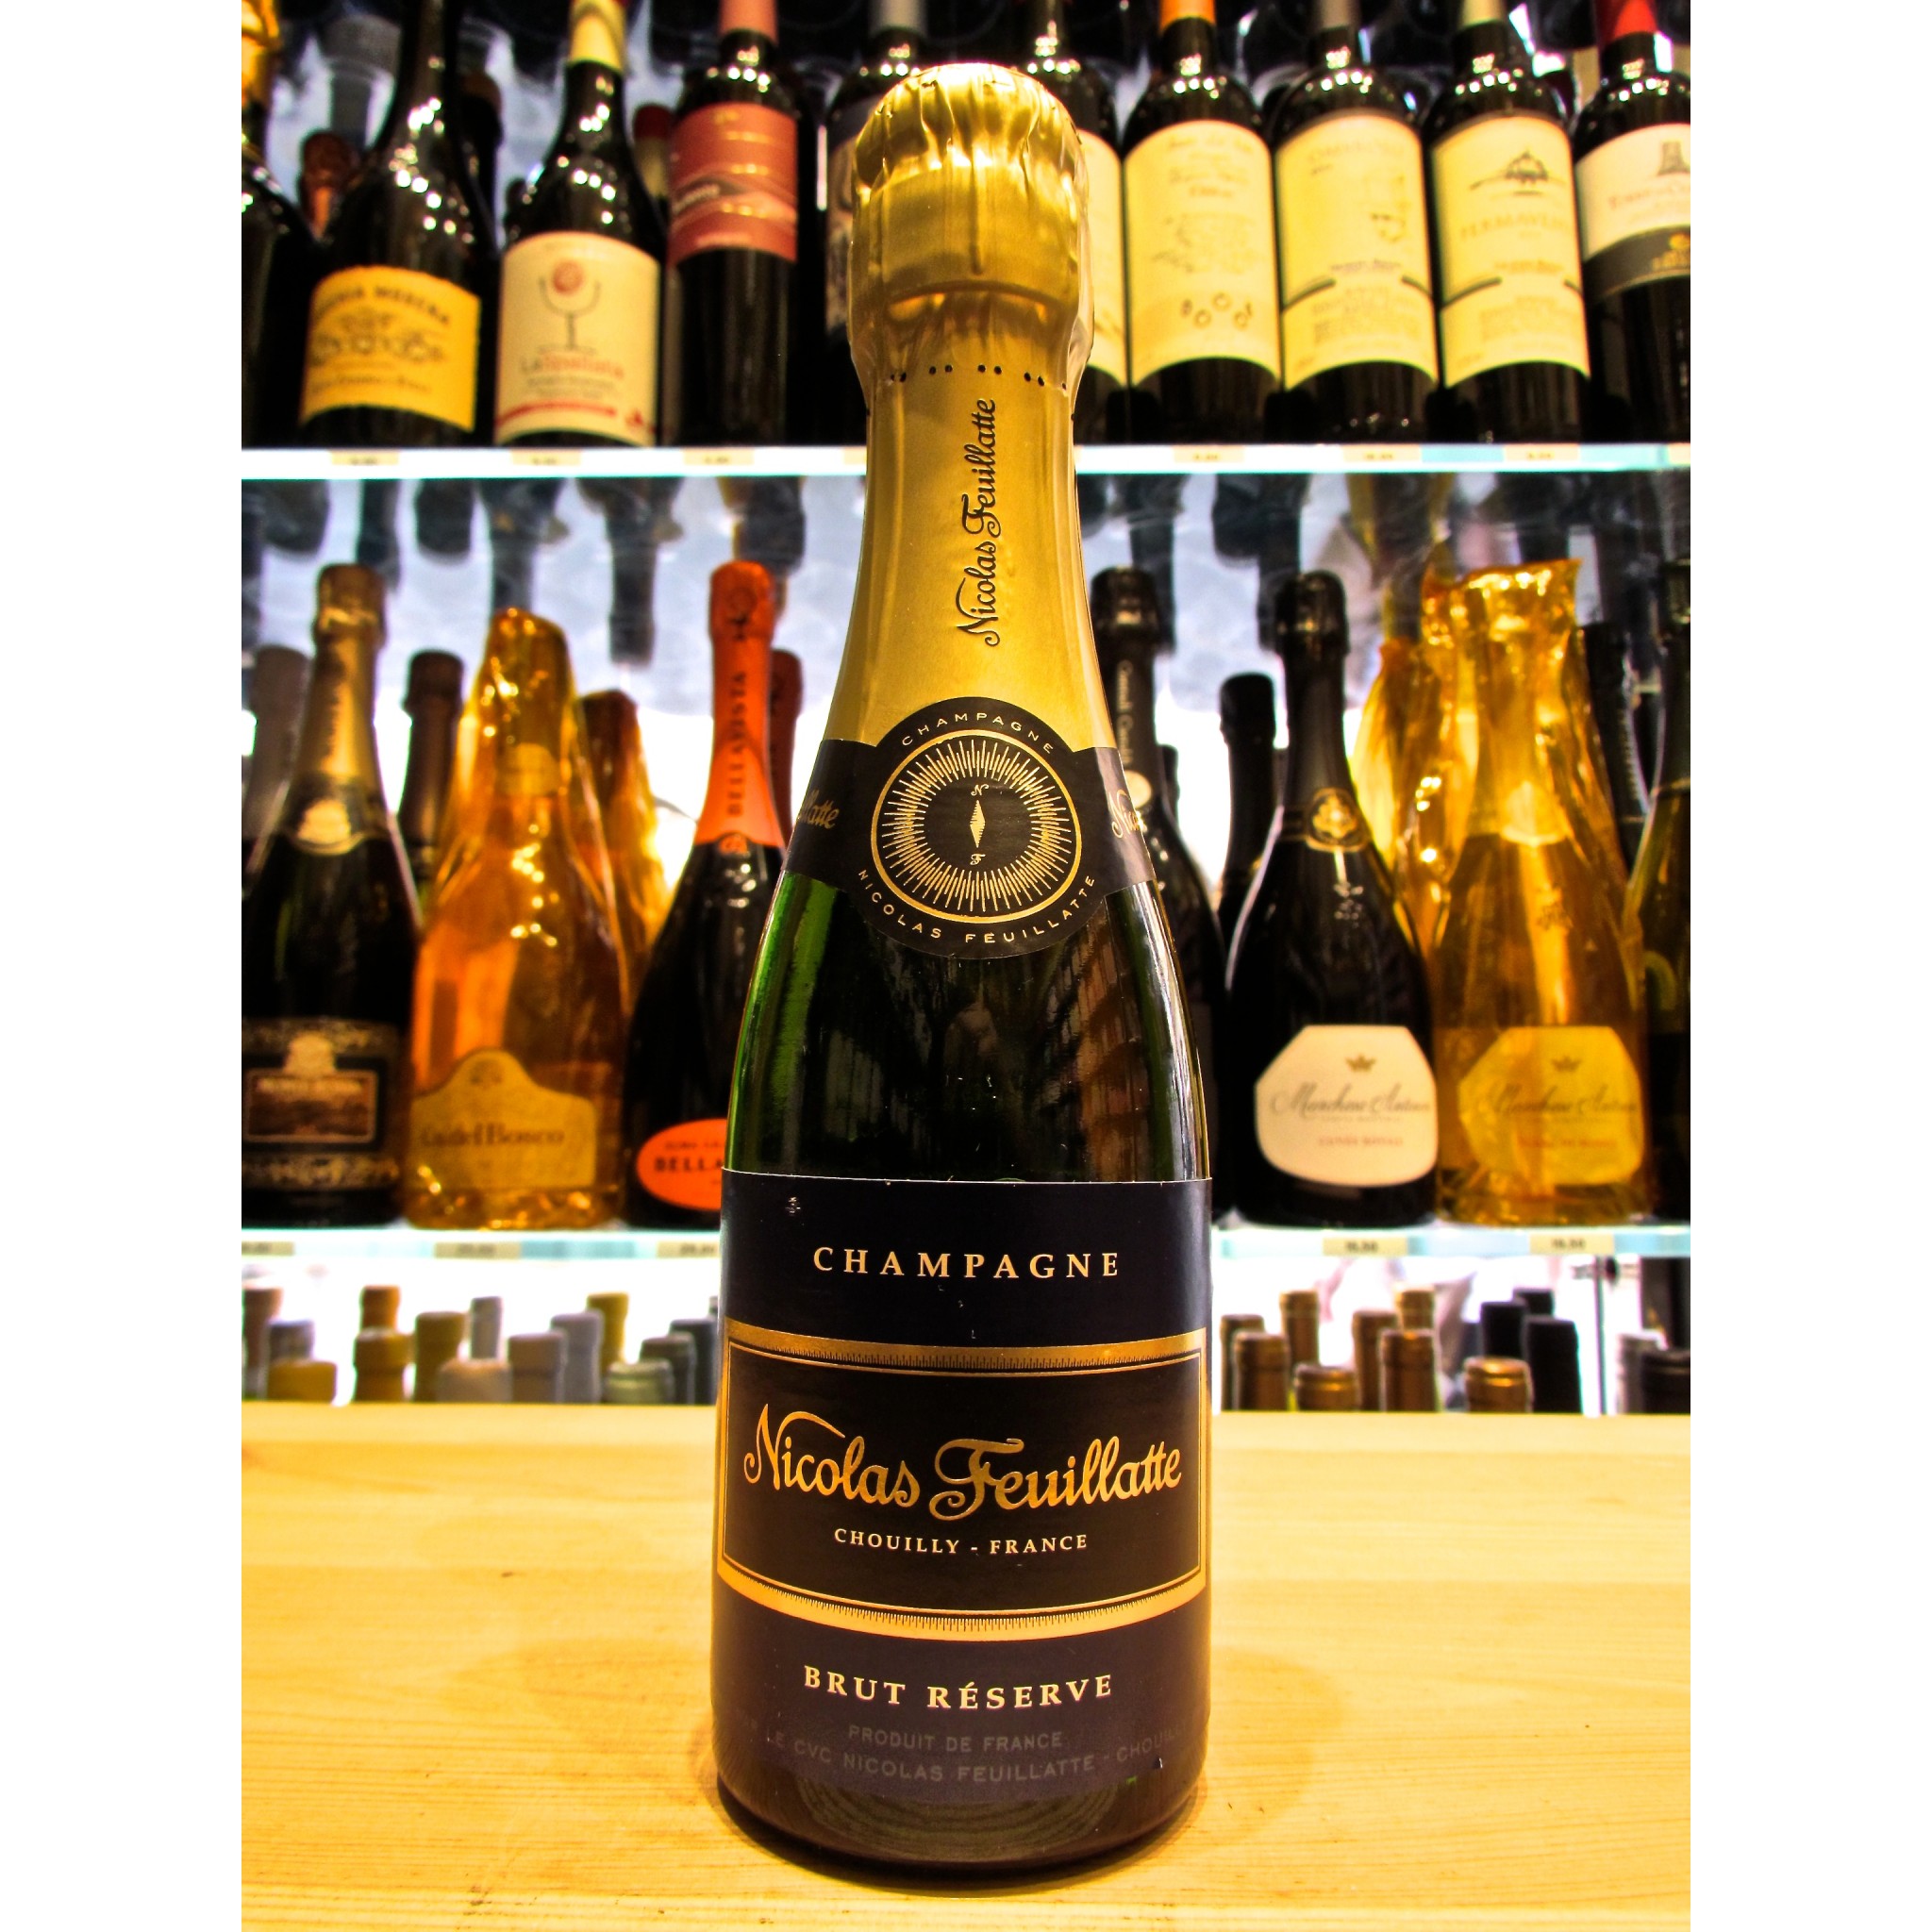 Online shop Champagne quality Nicolas the Brut Réserve. at French Online sale Feuillatte best price champagne